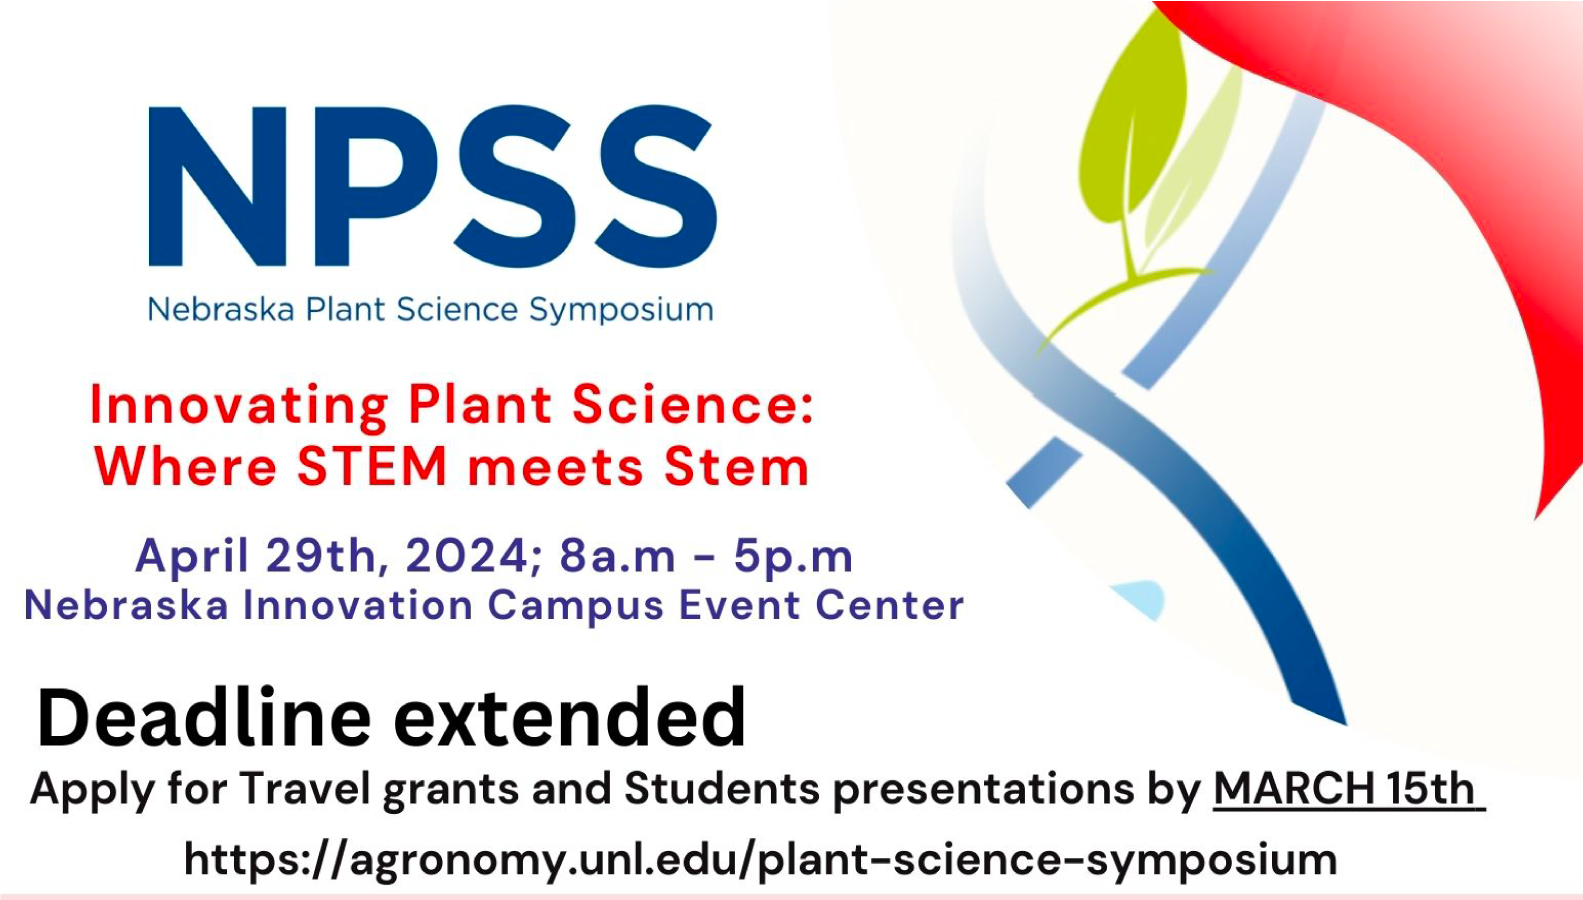 REGISTER TO PARTICIPATE AT NEBRASKA PLANT SCIENCE SYMPOSIUM BY MARCH 15TH, 2024